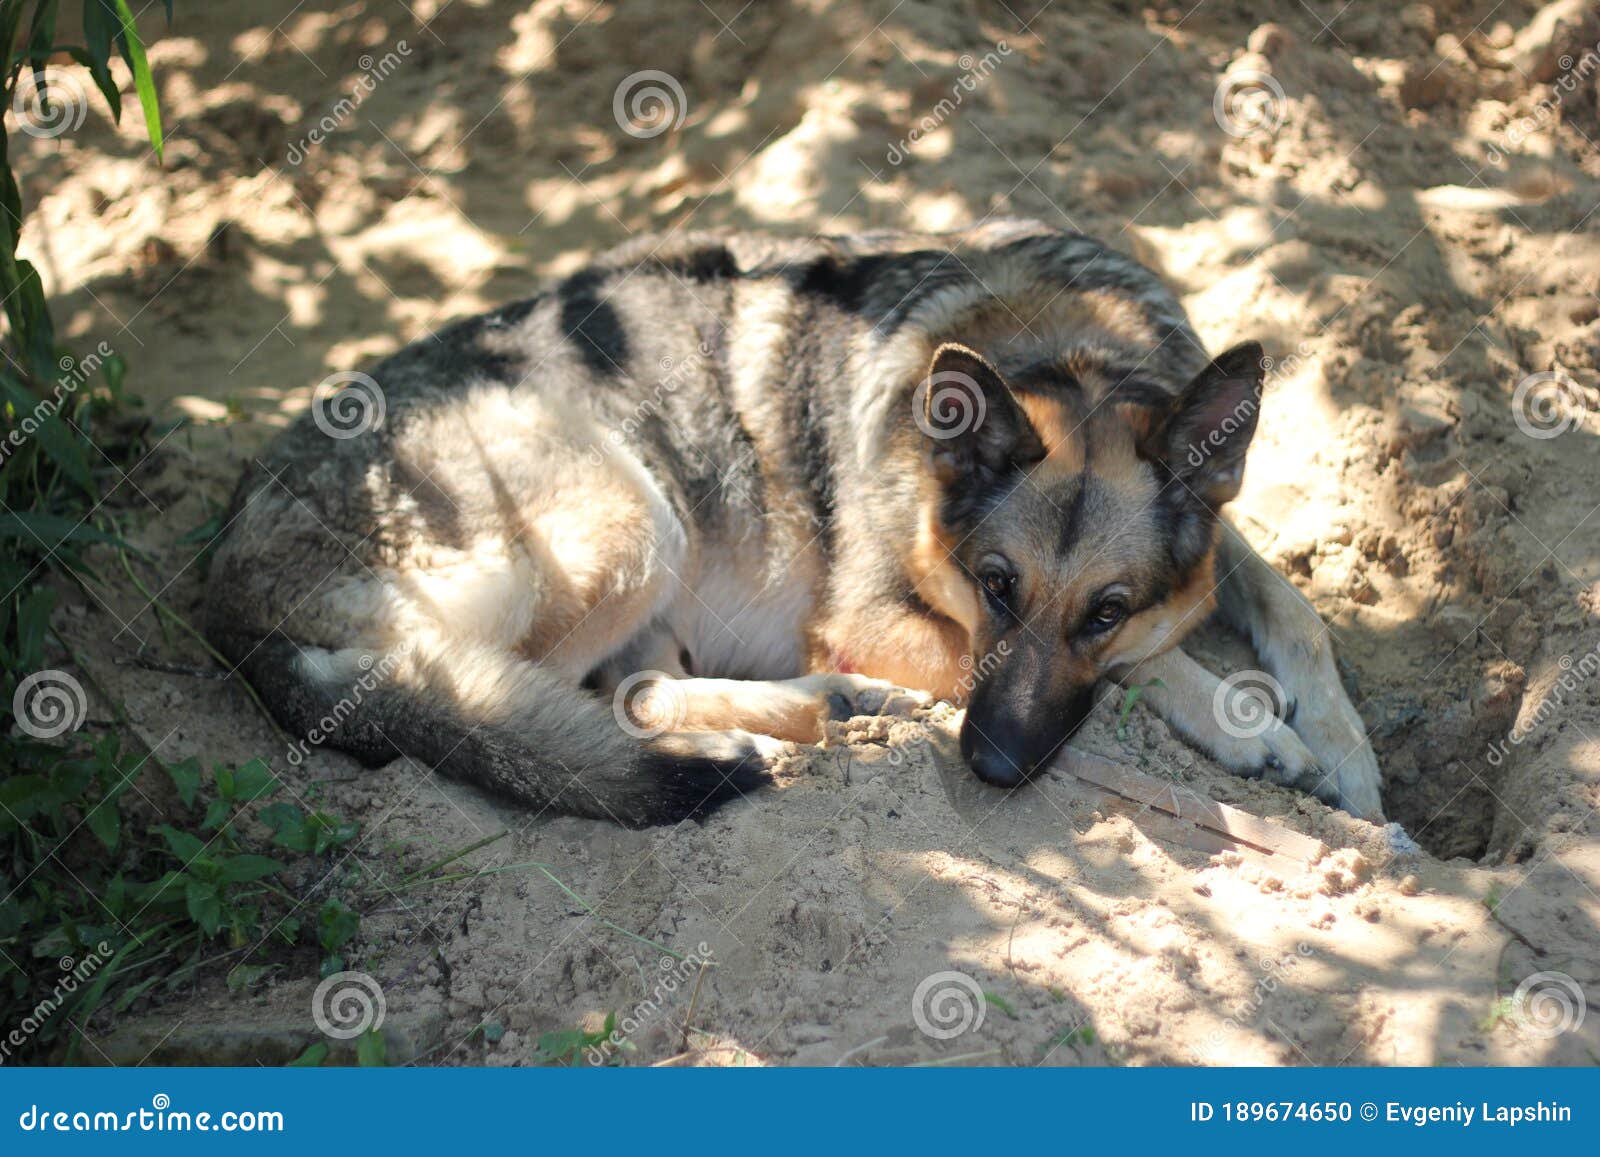 German Shepherd Hides in the Shade of Trees. Stock Photo - Image of ...